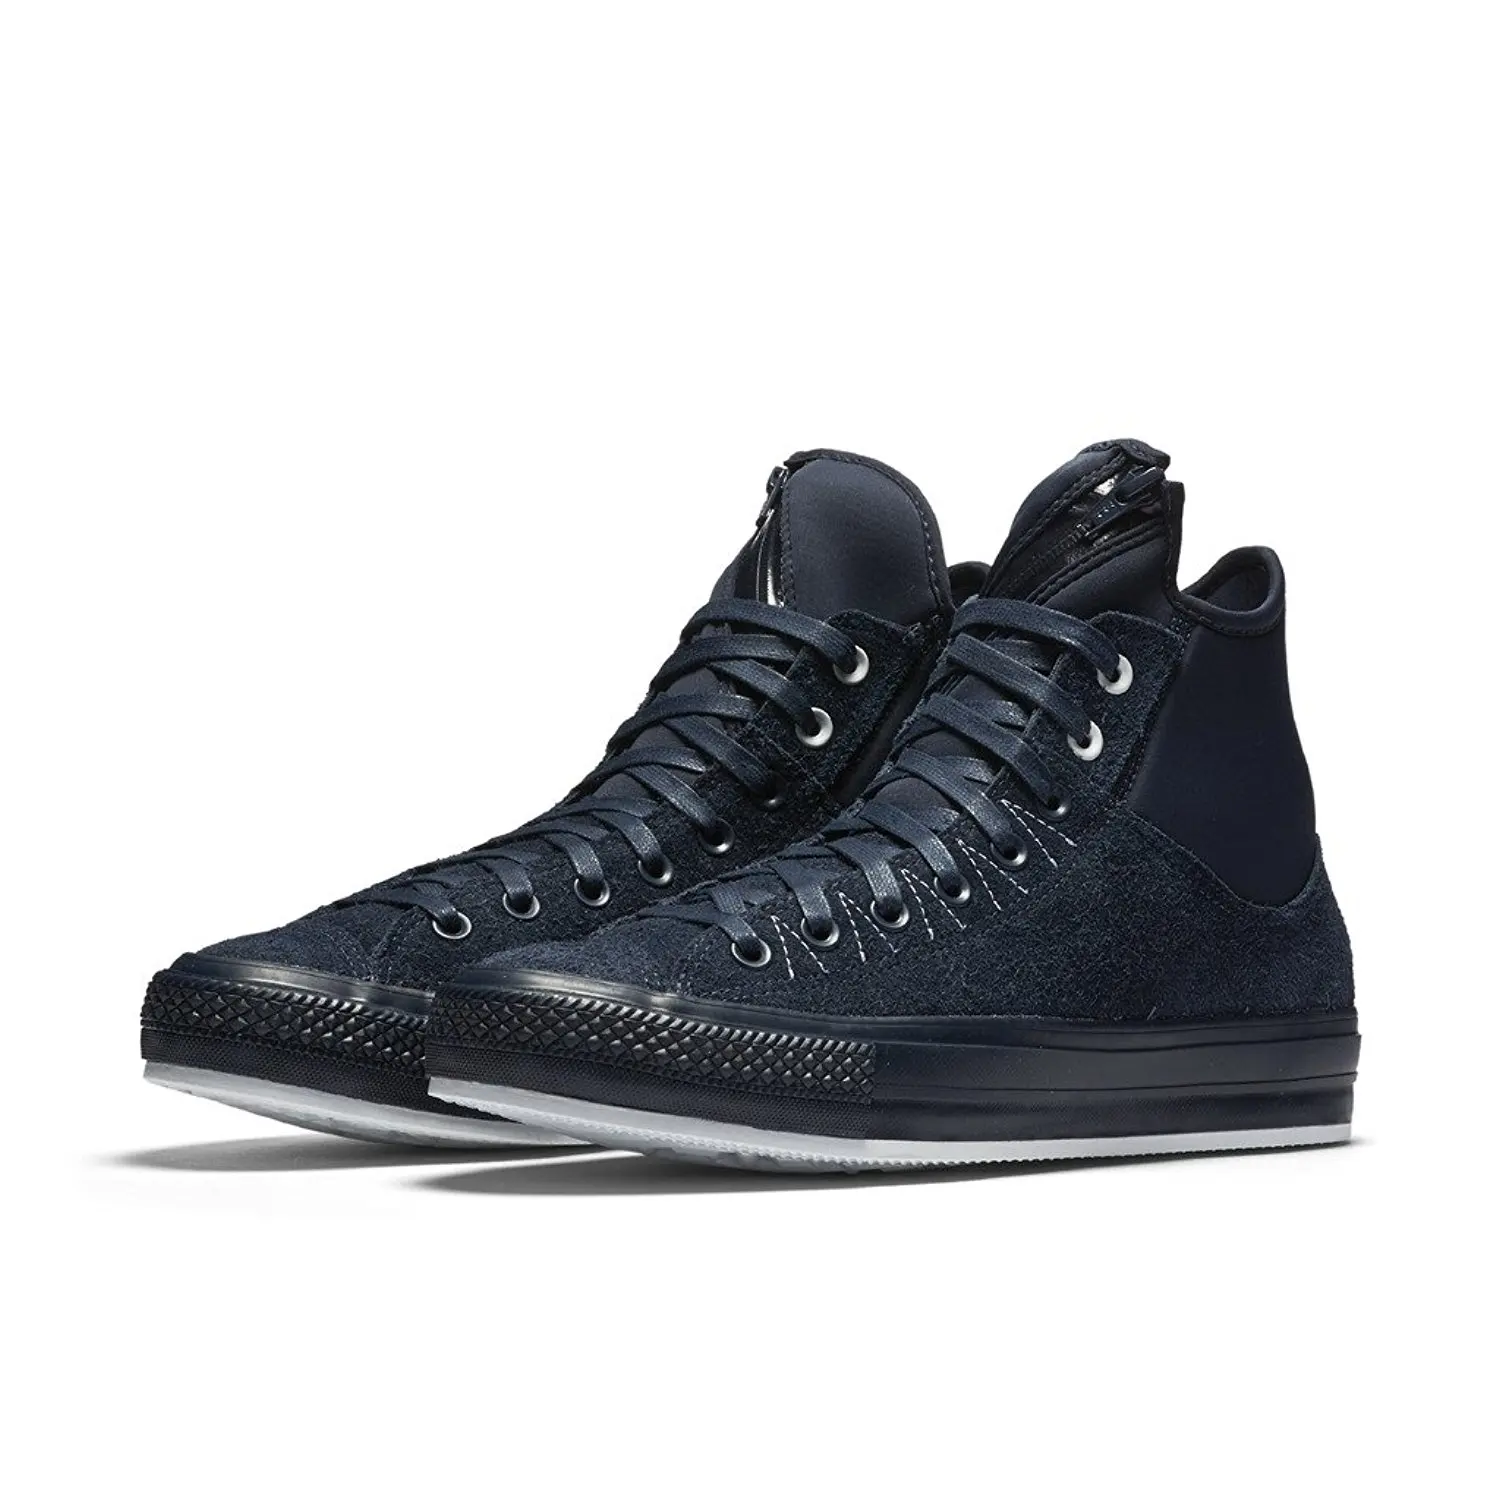 Buy Converse Chuck Taylor All Star MA-1 Hairy Suede SE High Top Unisex  Sneakers 153637 in Cheap Price on Alibaba.com